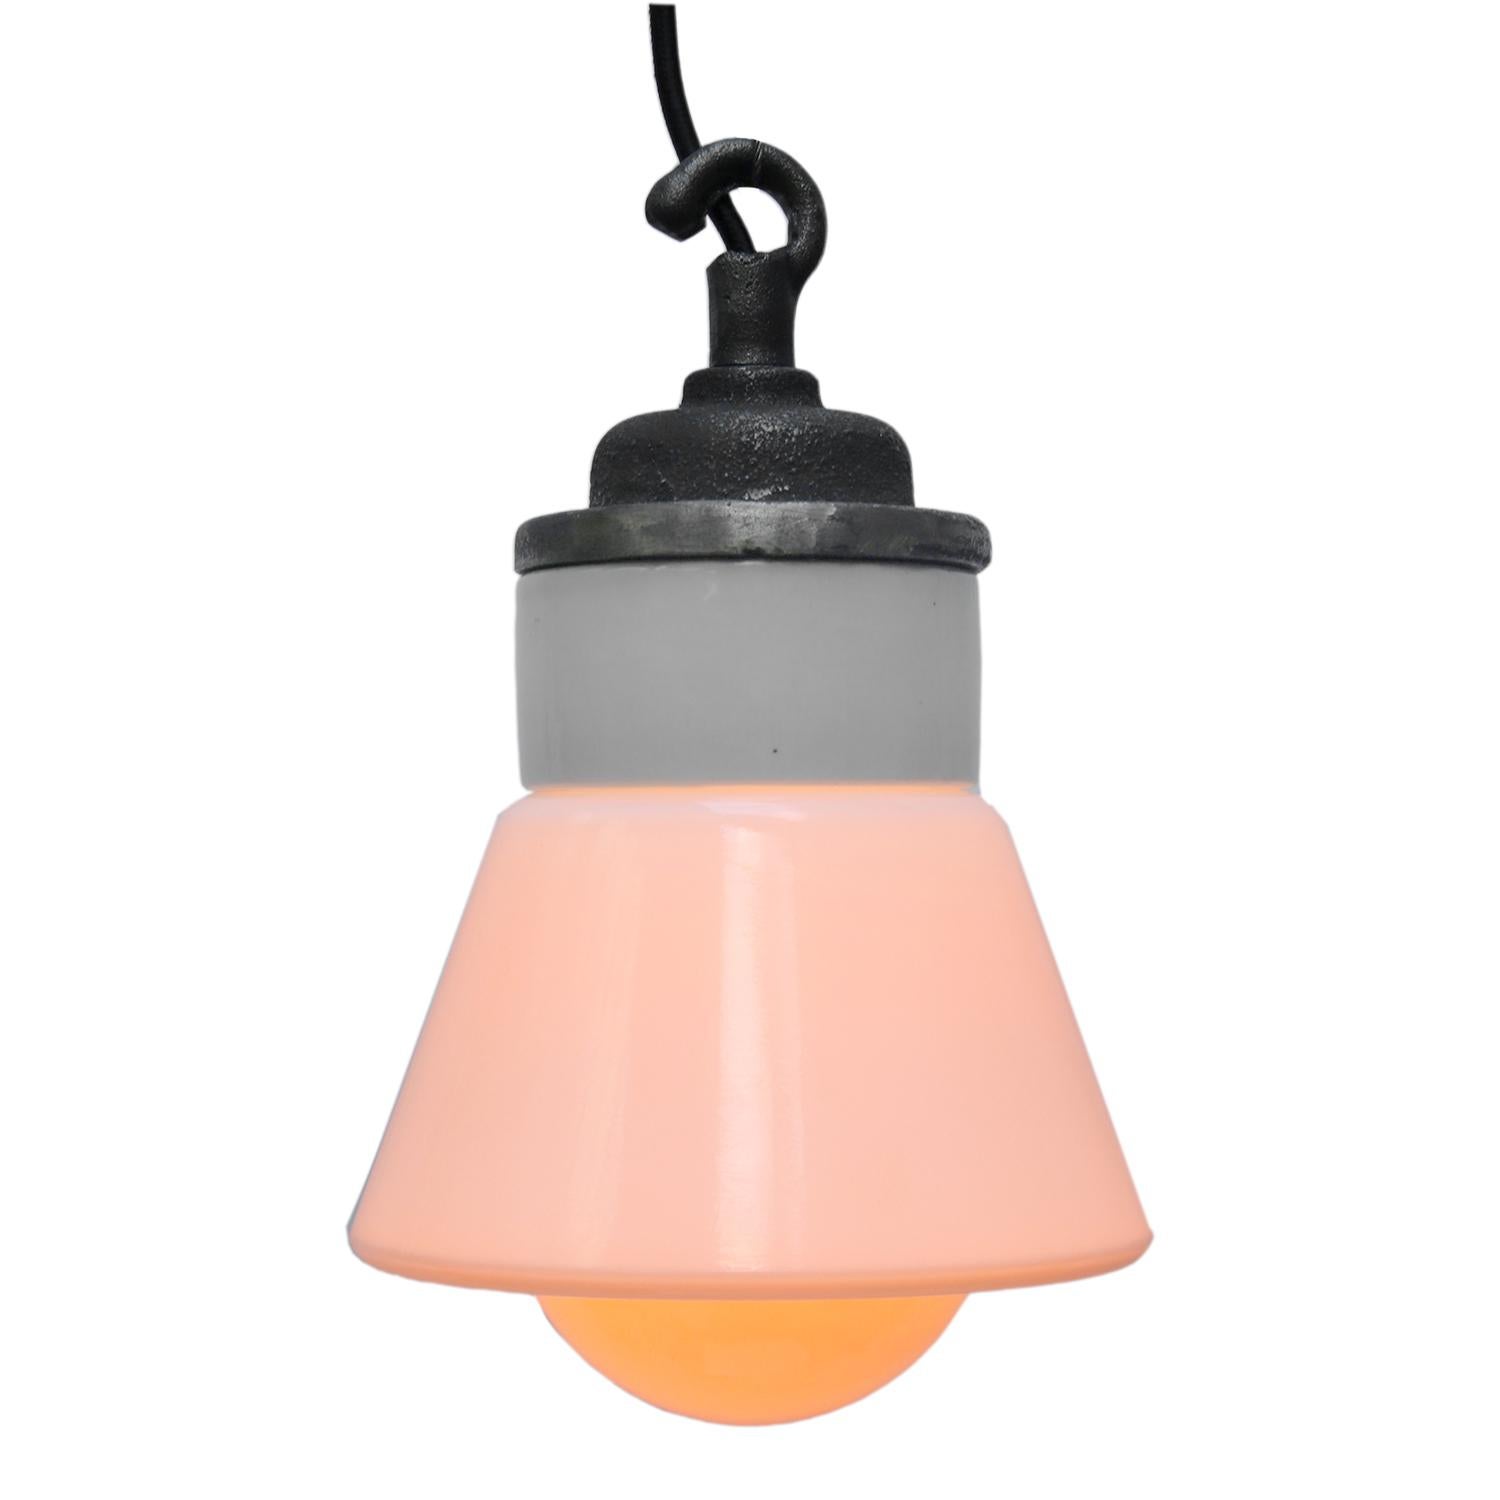 Porcelain Industrial hanging lamp.
White porcelain, cast iron and opaline glass.
2 conductors, no ground.

Weight: 2.00 kg / 4.4 lb

Priced per individual item. All lamps have been made suitable by international standards for incandescent